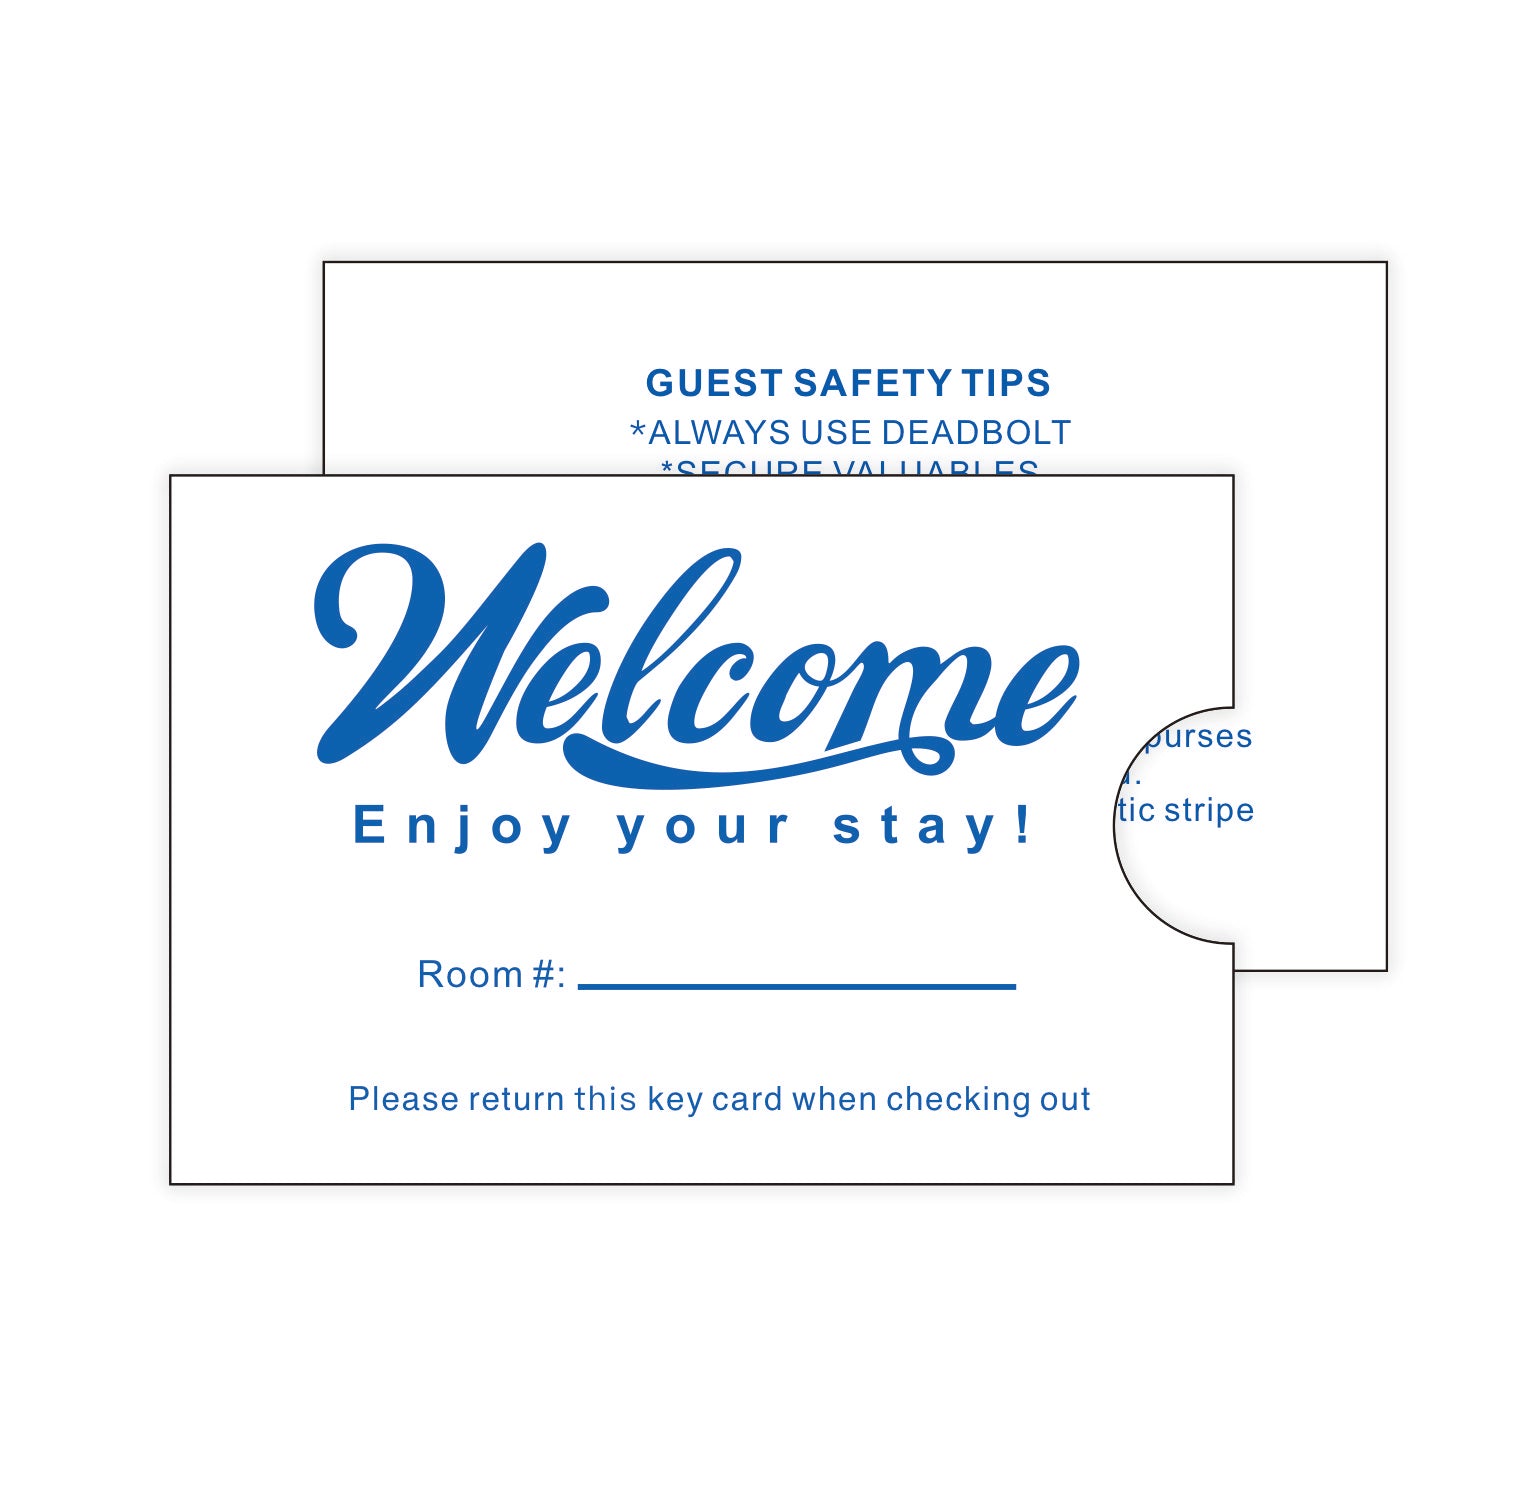 Gialer Hotel & Motel key cards key card with envelopes sleeve welcome enjoy your stay magnetic strip door card